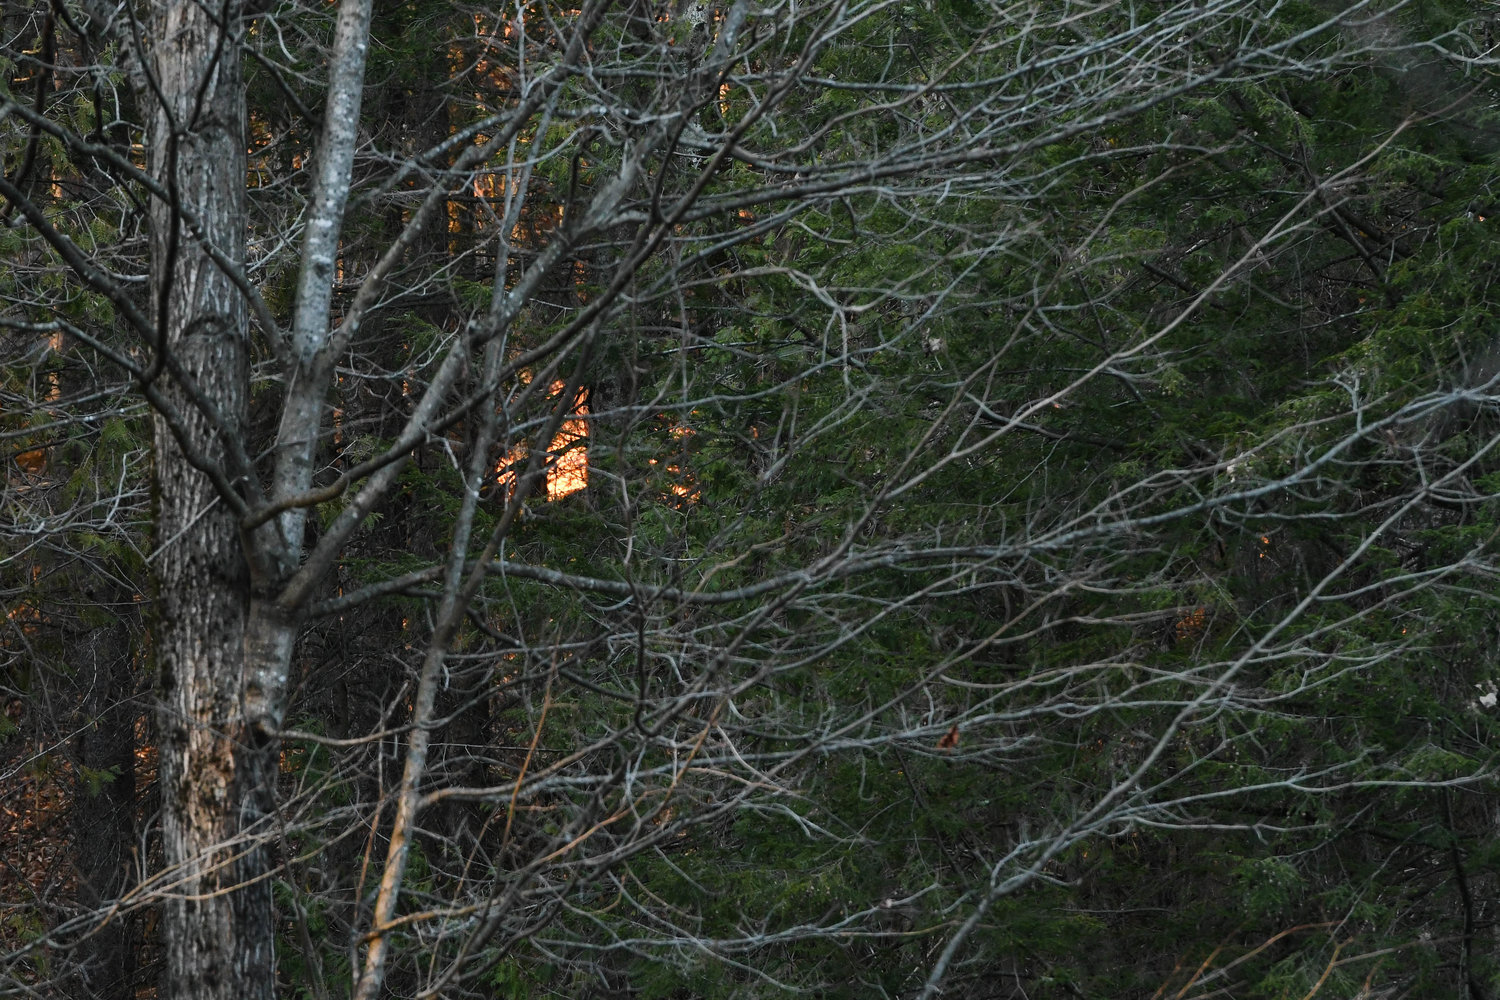 Several emergency crews from Herkimer and Oneida counties responded to a grass/tree fire that engulfed a large wooded area off Dover Road in the Village of Poland Thursday.